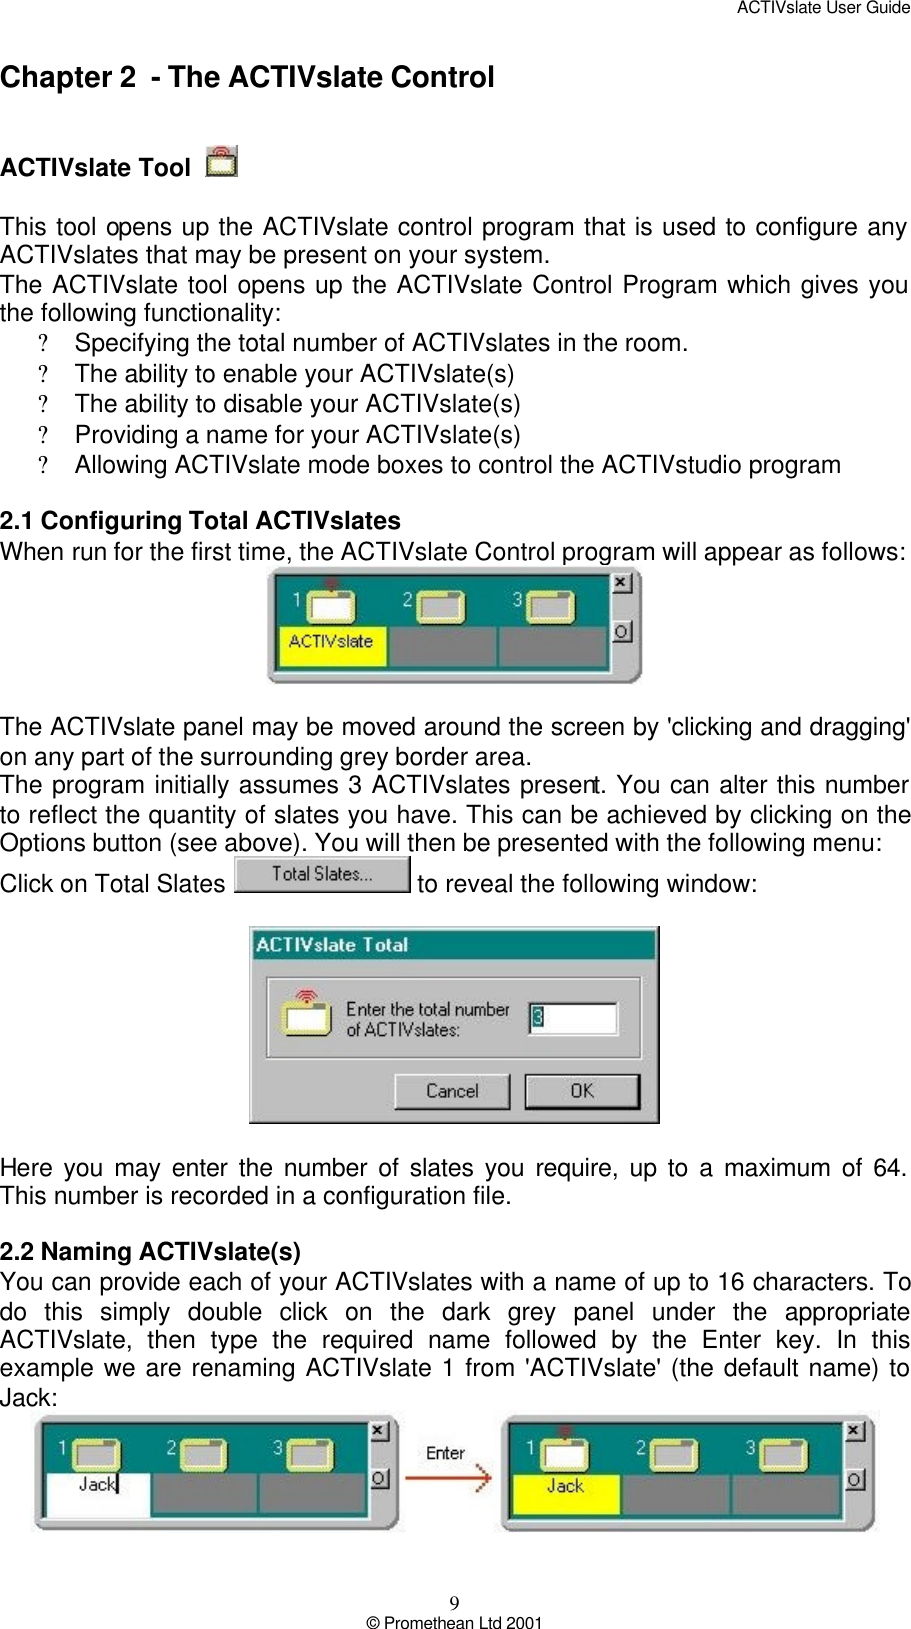 ACTIVslate User Guide 9 © Promethean Ltd 2001 Chapter 2  - The ACTIVslate Control    ACTIVslate Tool     This tool opens up the ACTIVslate control program that is used to configure any ACTIVslates that may be present on your system.  The ACTIVslate tool opens up the ACTIVslate Control Program which gives you the following functionality: ? Specifying the total number of ACTIVslates in the room. ? The ability to enable your ACTIVslate(s) ? The ability to disable your ACTIVslate(s) ? Providing a name for your ACTIVslate(s) ? Allowing ACTIVslate mode boxes to control the ACTIVstudio program  2.1 Configuring Total ACTIVslates When run for the first time, the ACTIVslate Control program will appear as follows:   The ACTIVslate panel may be moved around the screen by &apos;clicking and dragging&apos; on any part of the surrounding grey border area. The program initially assumes 3 ACTIVslates present. You can alter this number to reflect the quantity of slates you have. This can be achieved by clicking on the Options button (see above). You will then be presented with the following menu:  Click on Total Slates   to reveal the following window:    Here you may enter the number of slates you require, up to a maximum of 64. This number is recorded in a configuration file.  2.2 Naming ACTIVslate(s) You can provide each of your ACTIVslates with a name of up to 16 characters. To do this simply double click on the dark grey panel under the appropriate ACTIVslate, then type the required name followed by the Enter key. In this example we are renaming ACTIVslate 1 from &apos;ACTIVslate&apos; (the default name) to Jack:   